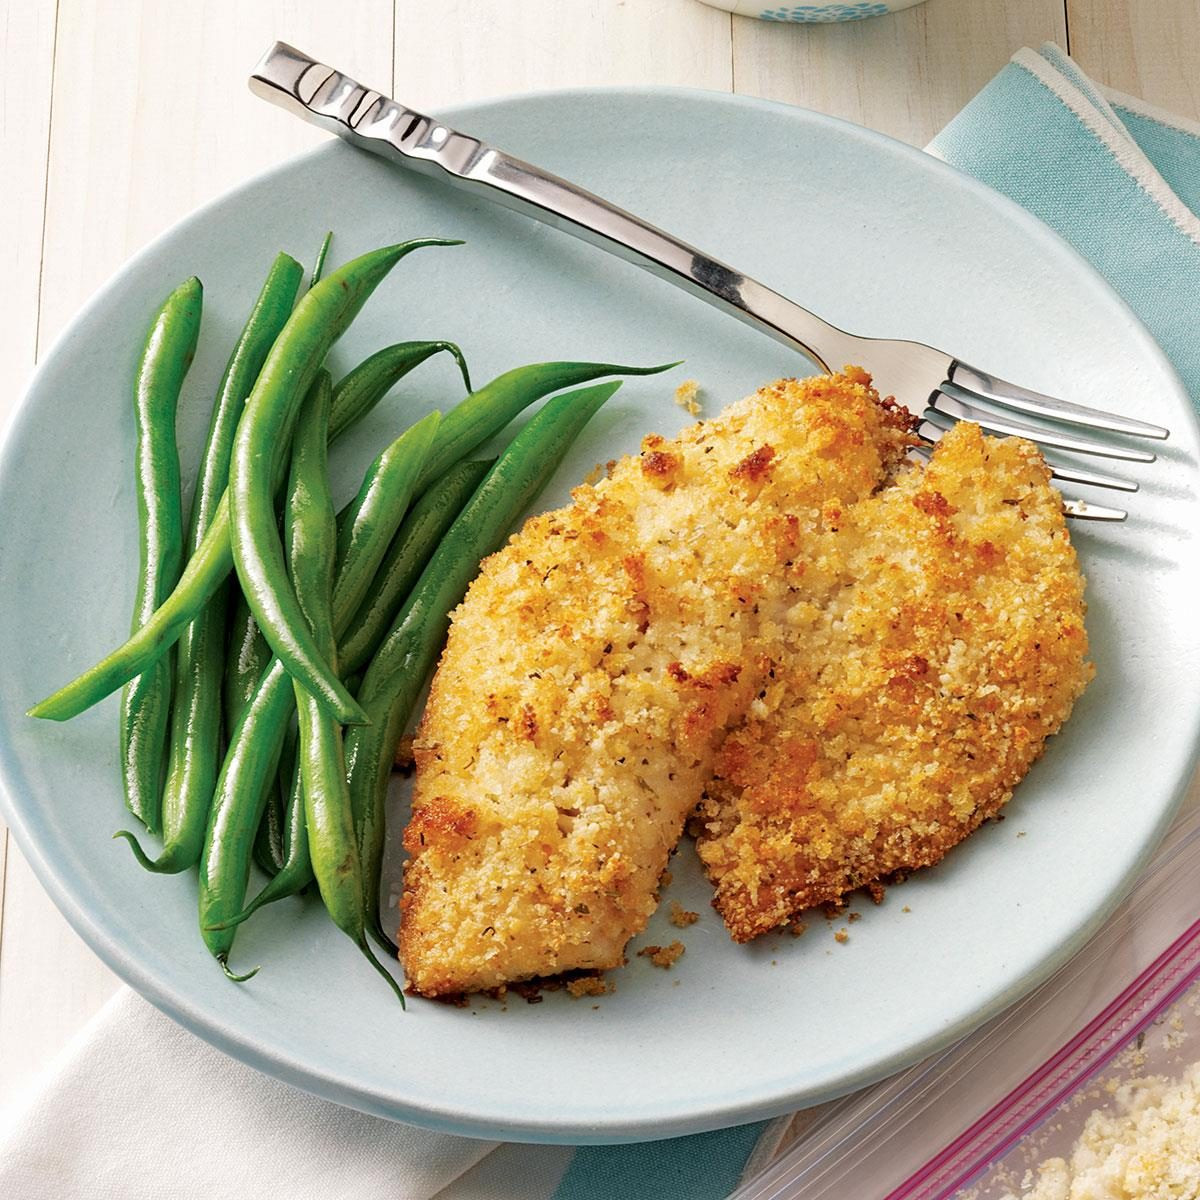 Recipes For Tilapia Fish In The Oven
 Breaded Baked Tilapia Recipe